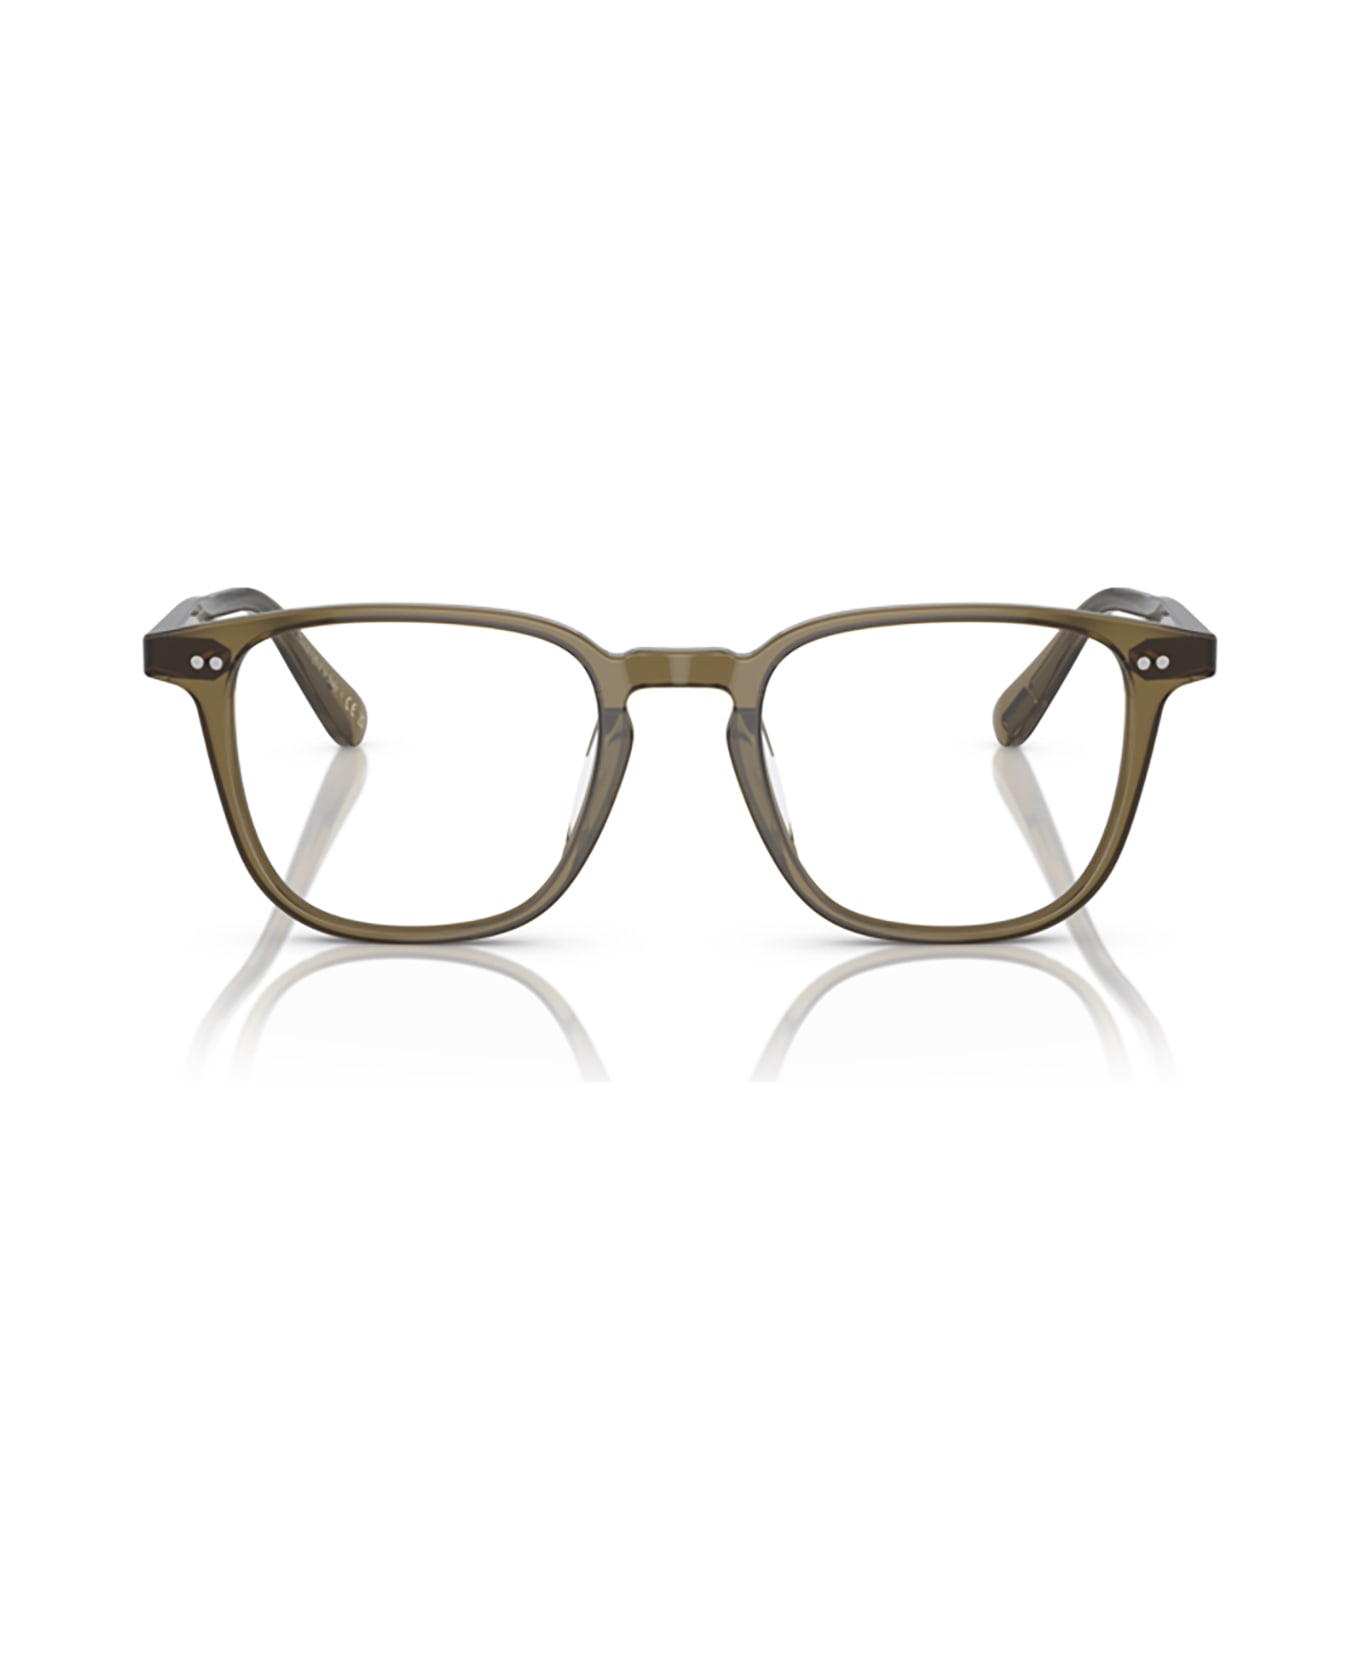 Oliver Peoples Ov5532u Dusty Olive Glasses - Dusty Olive